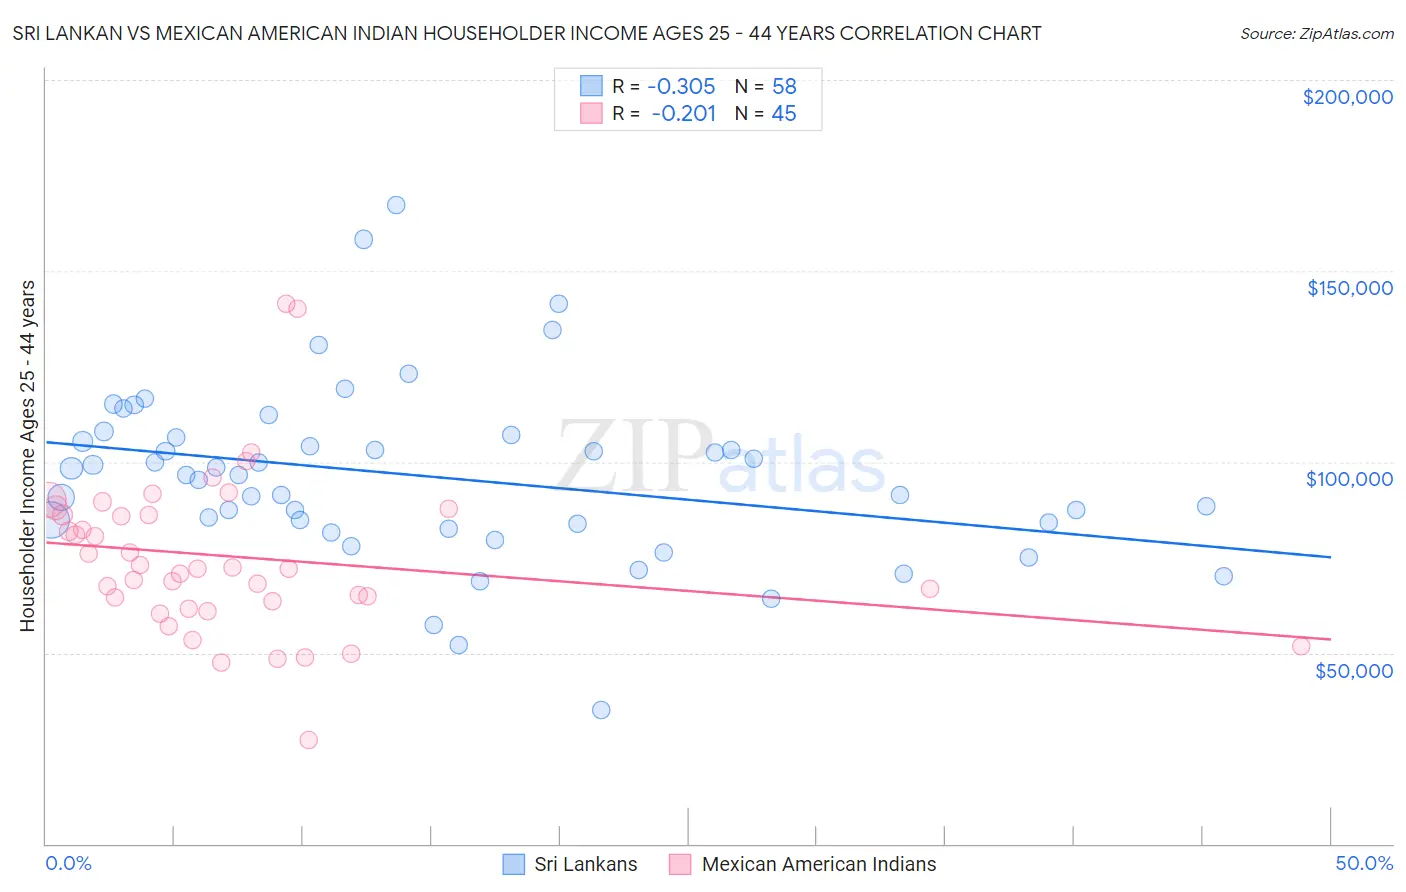 Sri Lankan vs Mexican American Indian Householder Income Ages 25 - 44 years